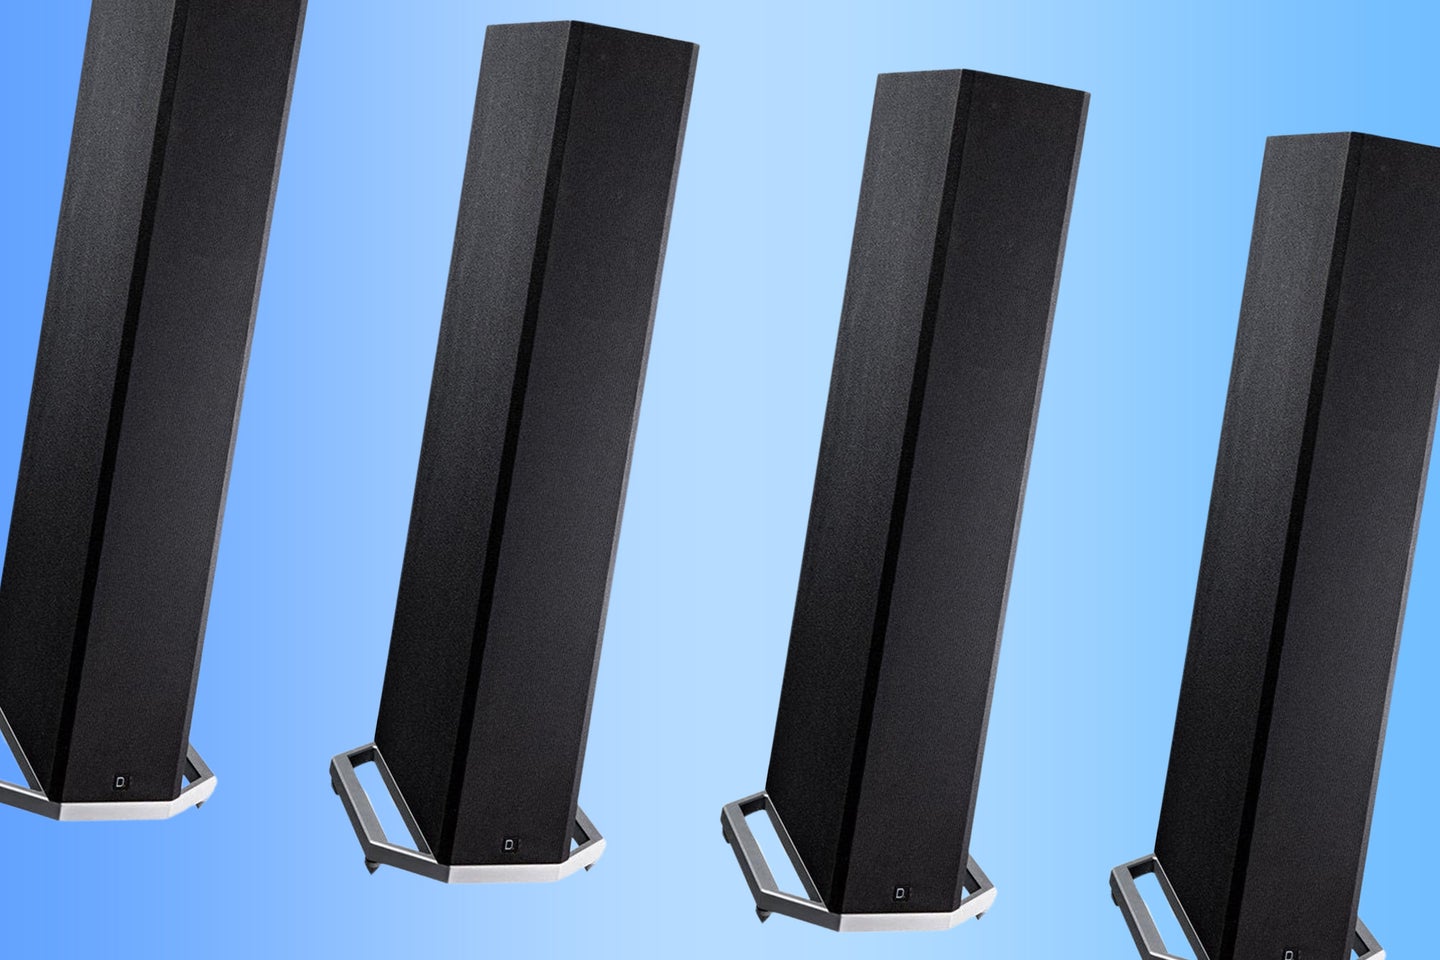 A lineup of Definitive tower speakers on a blue and light blue background